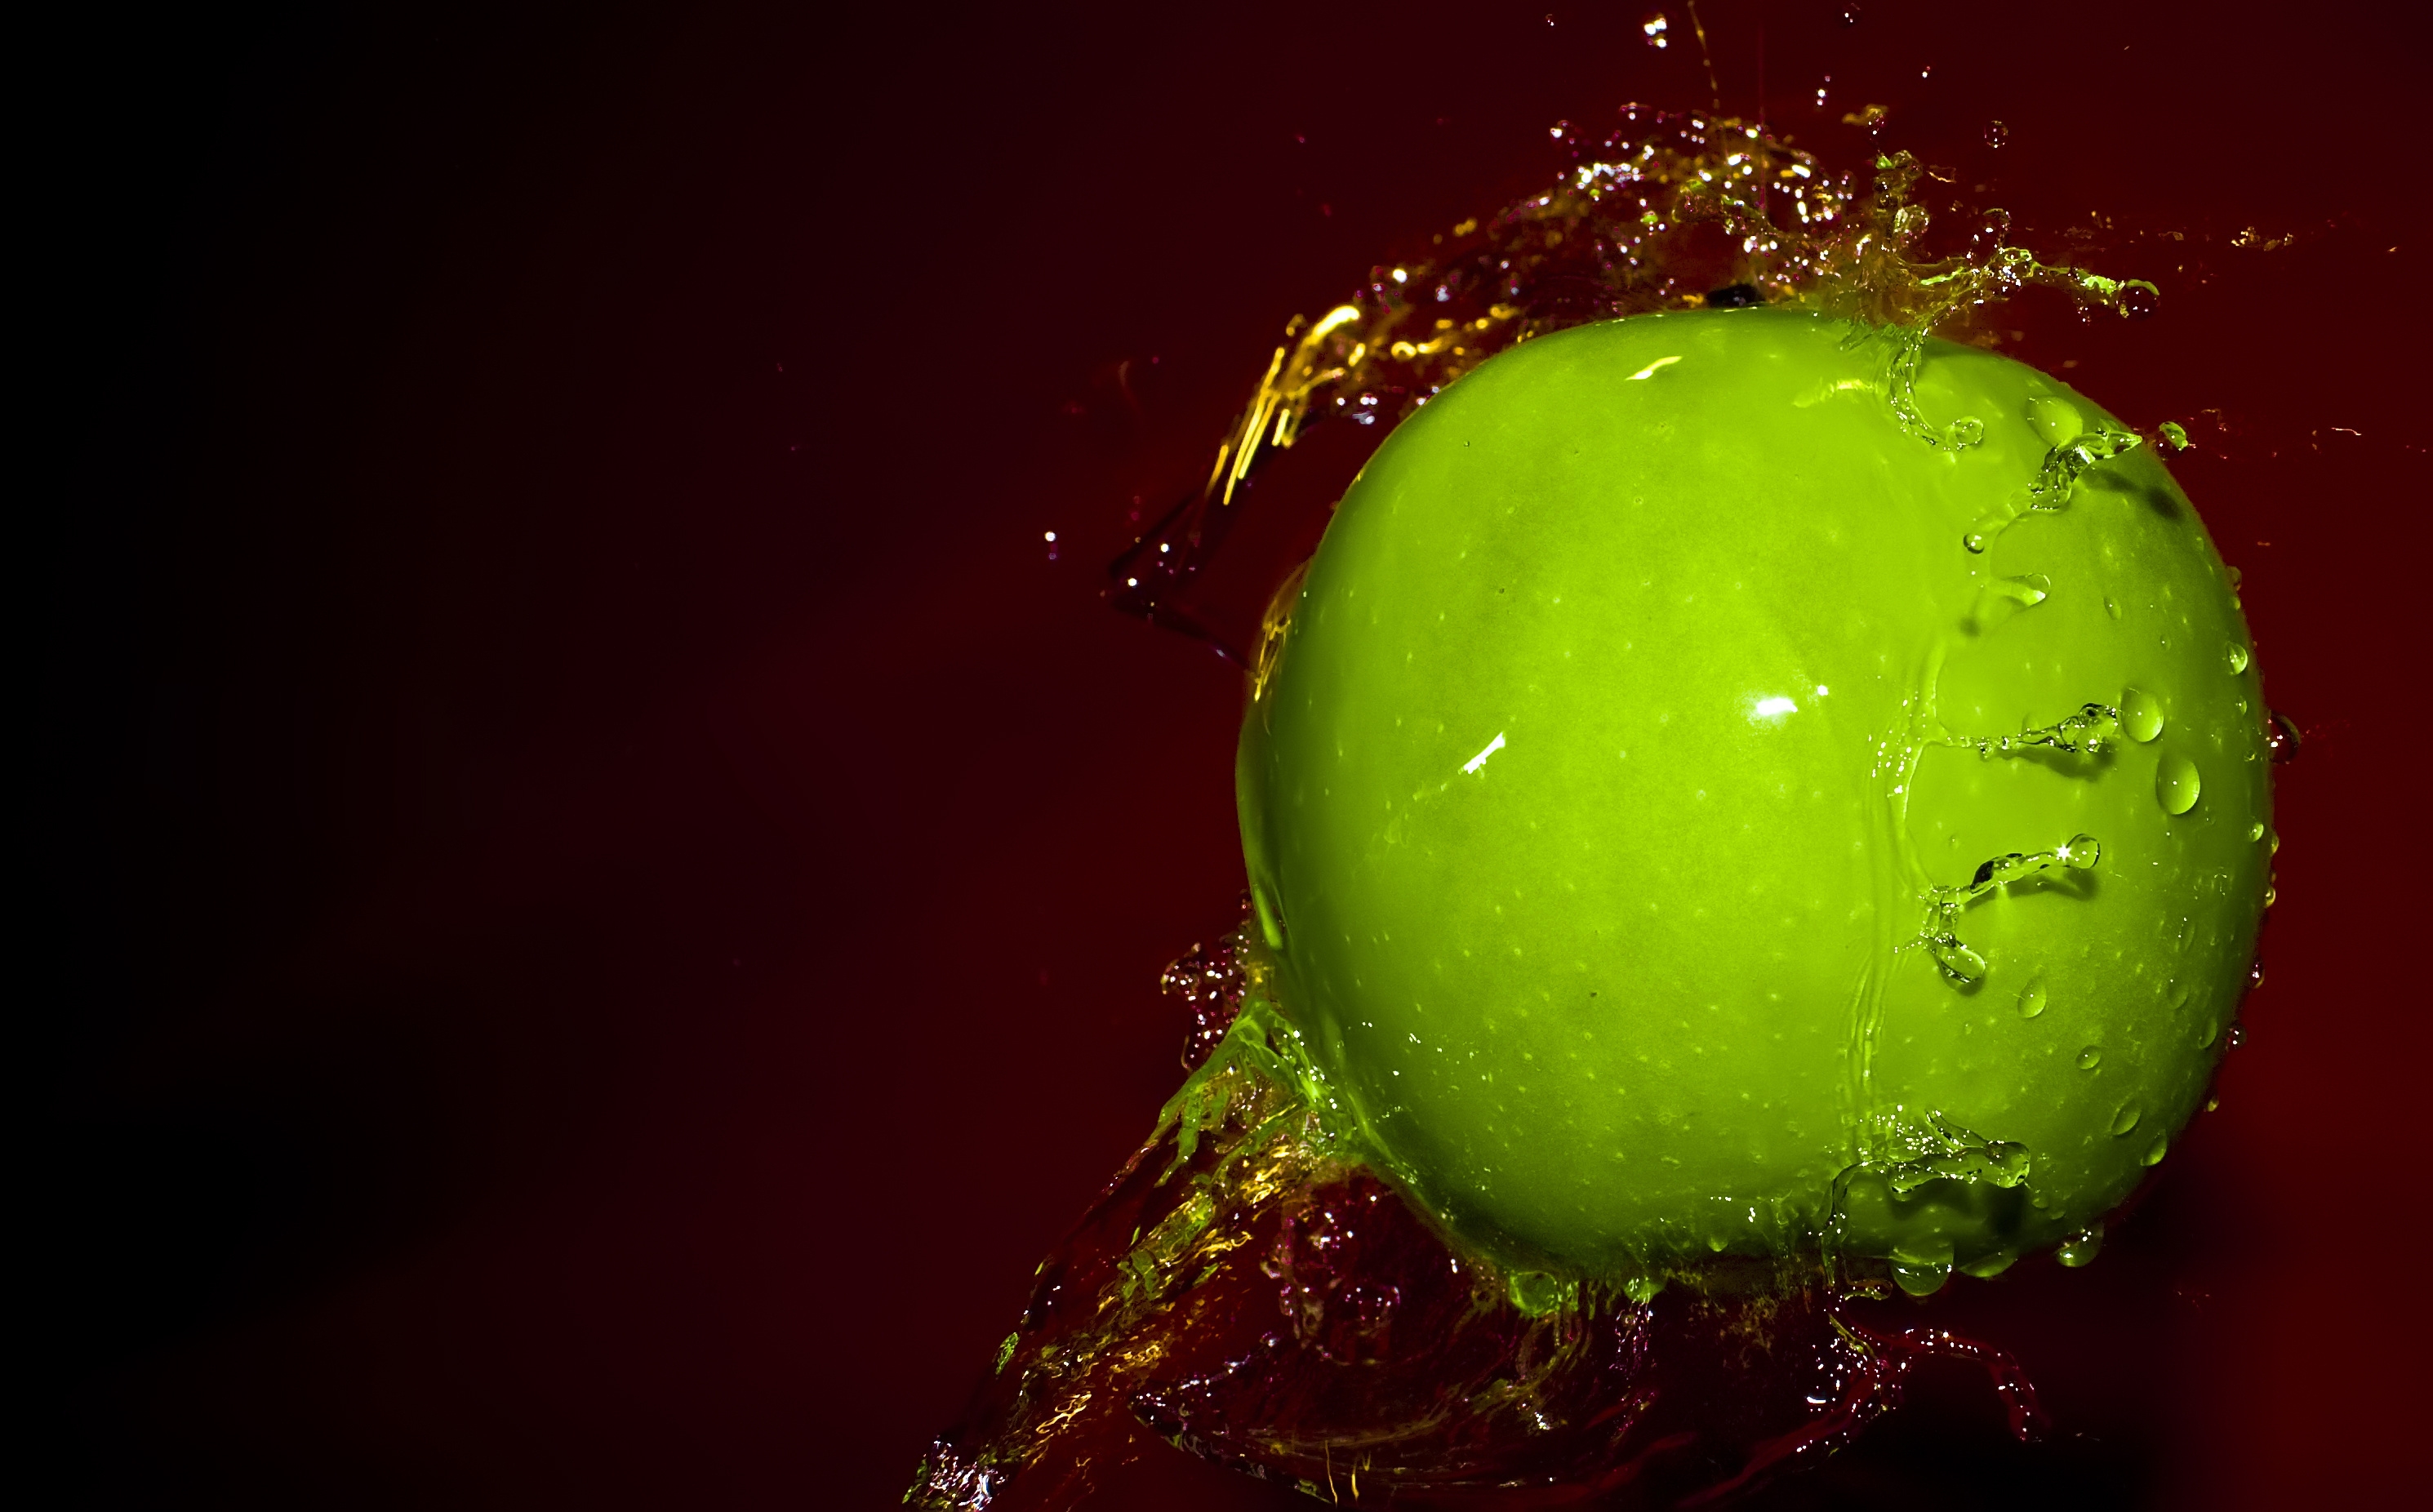 Wallpaper, food, water, red, green, ball, spray, light, color, apple, leaf, flower, drops, computer wallpaper, christmas decoration, close up, macro photography 2980x1852